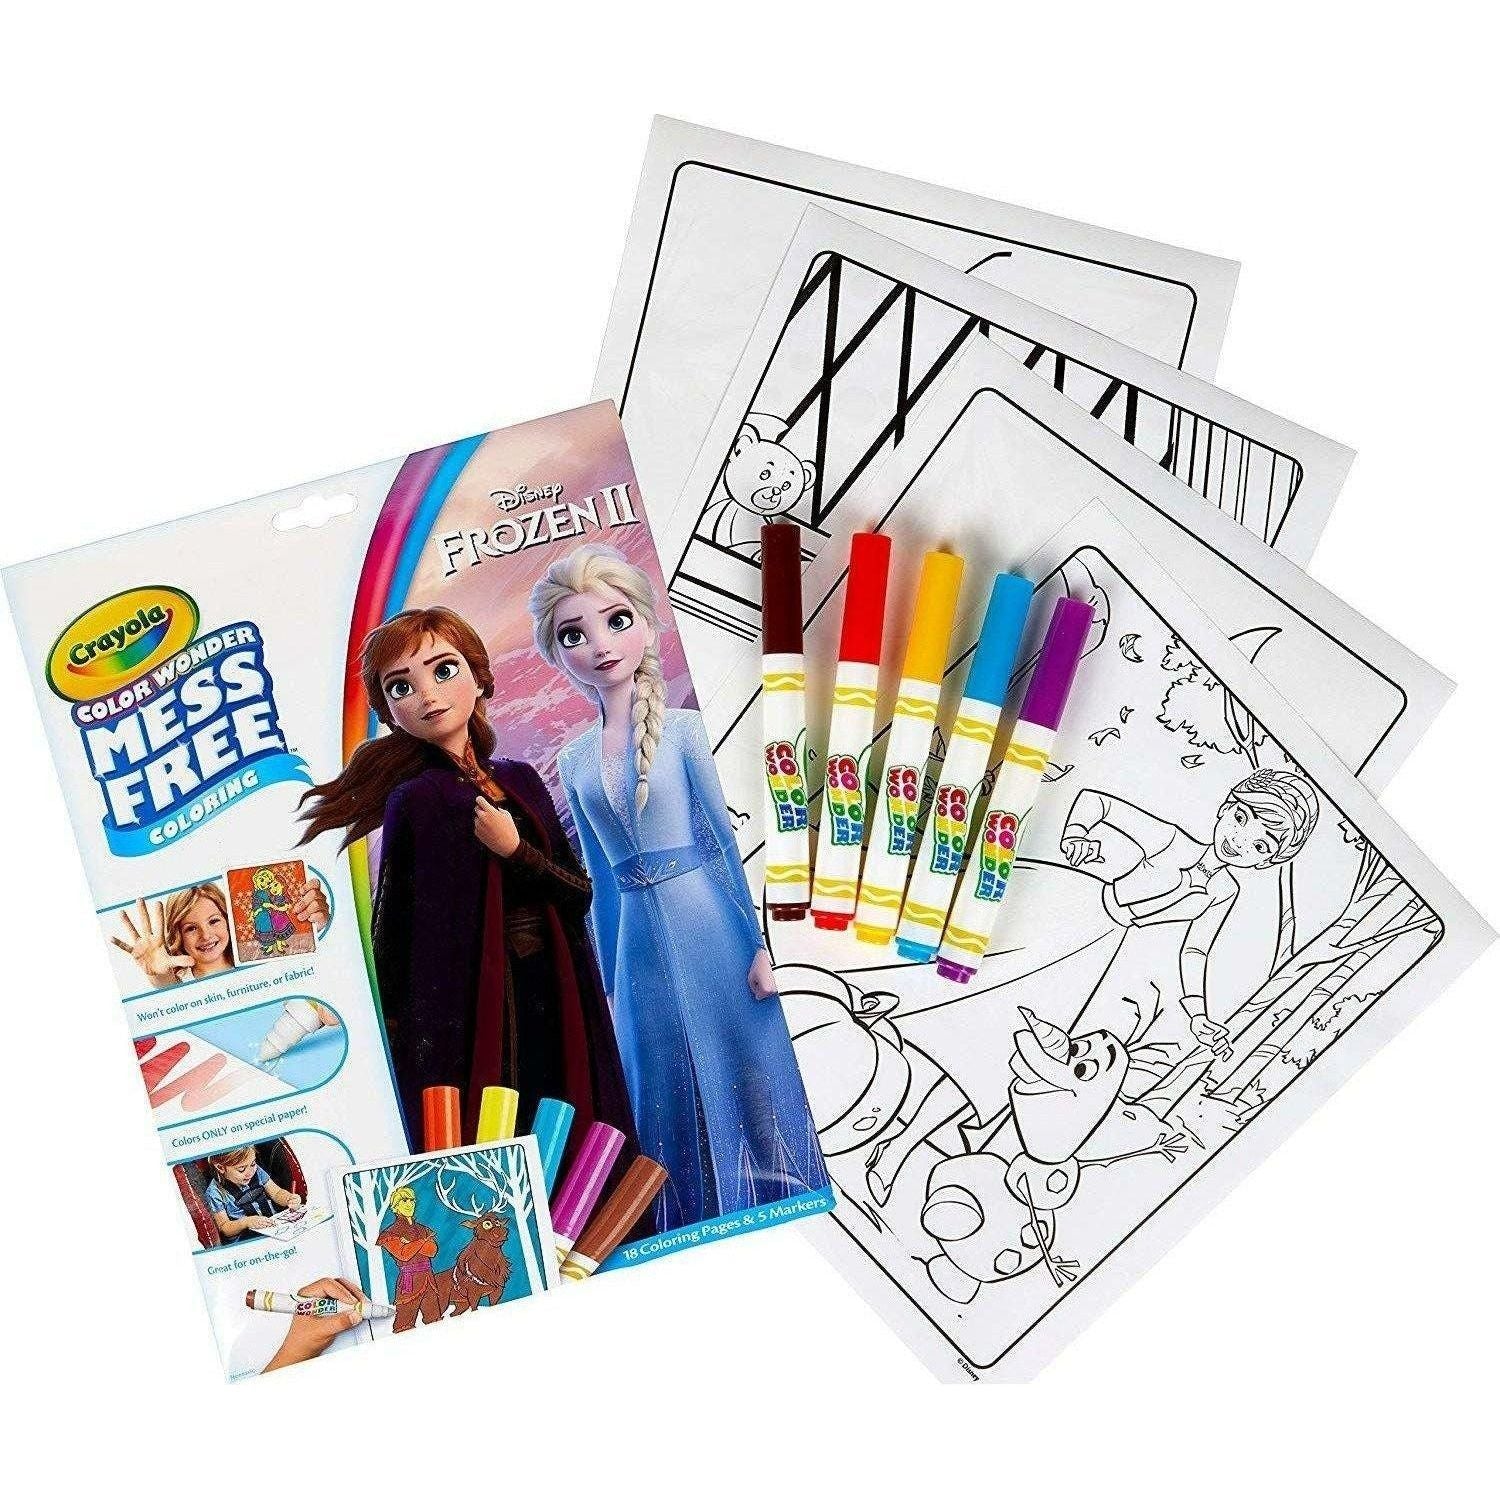 Crayola Color Wonder Frozen Coloring Book & Markers, Mess Free Coloring Gift for Kids - BumbleToys - 5-7 Years, Drawing & Painting, Frozen, Girls